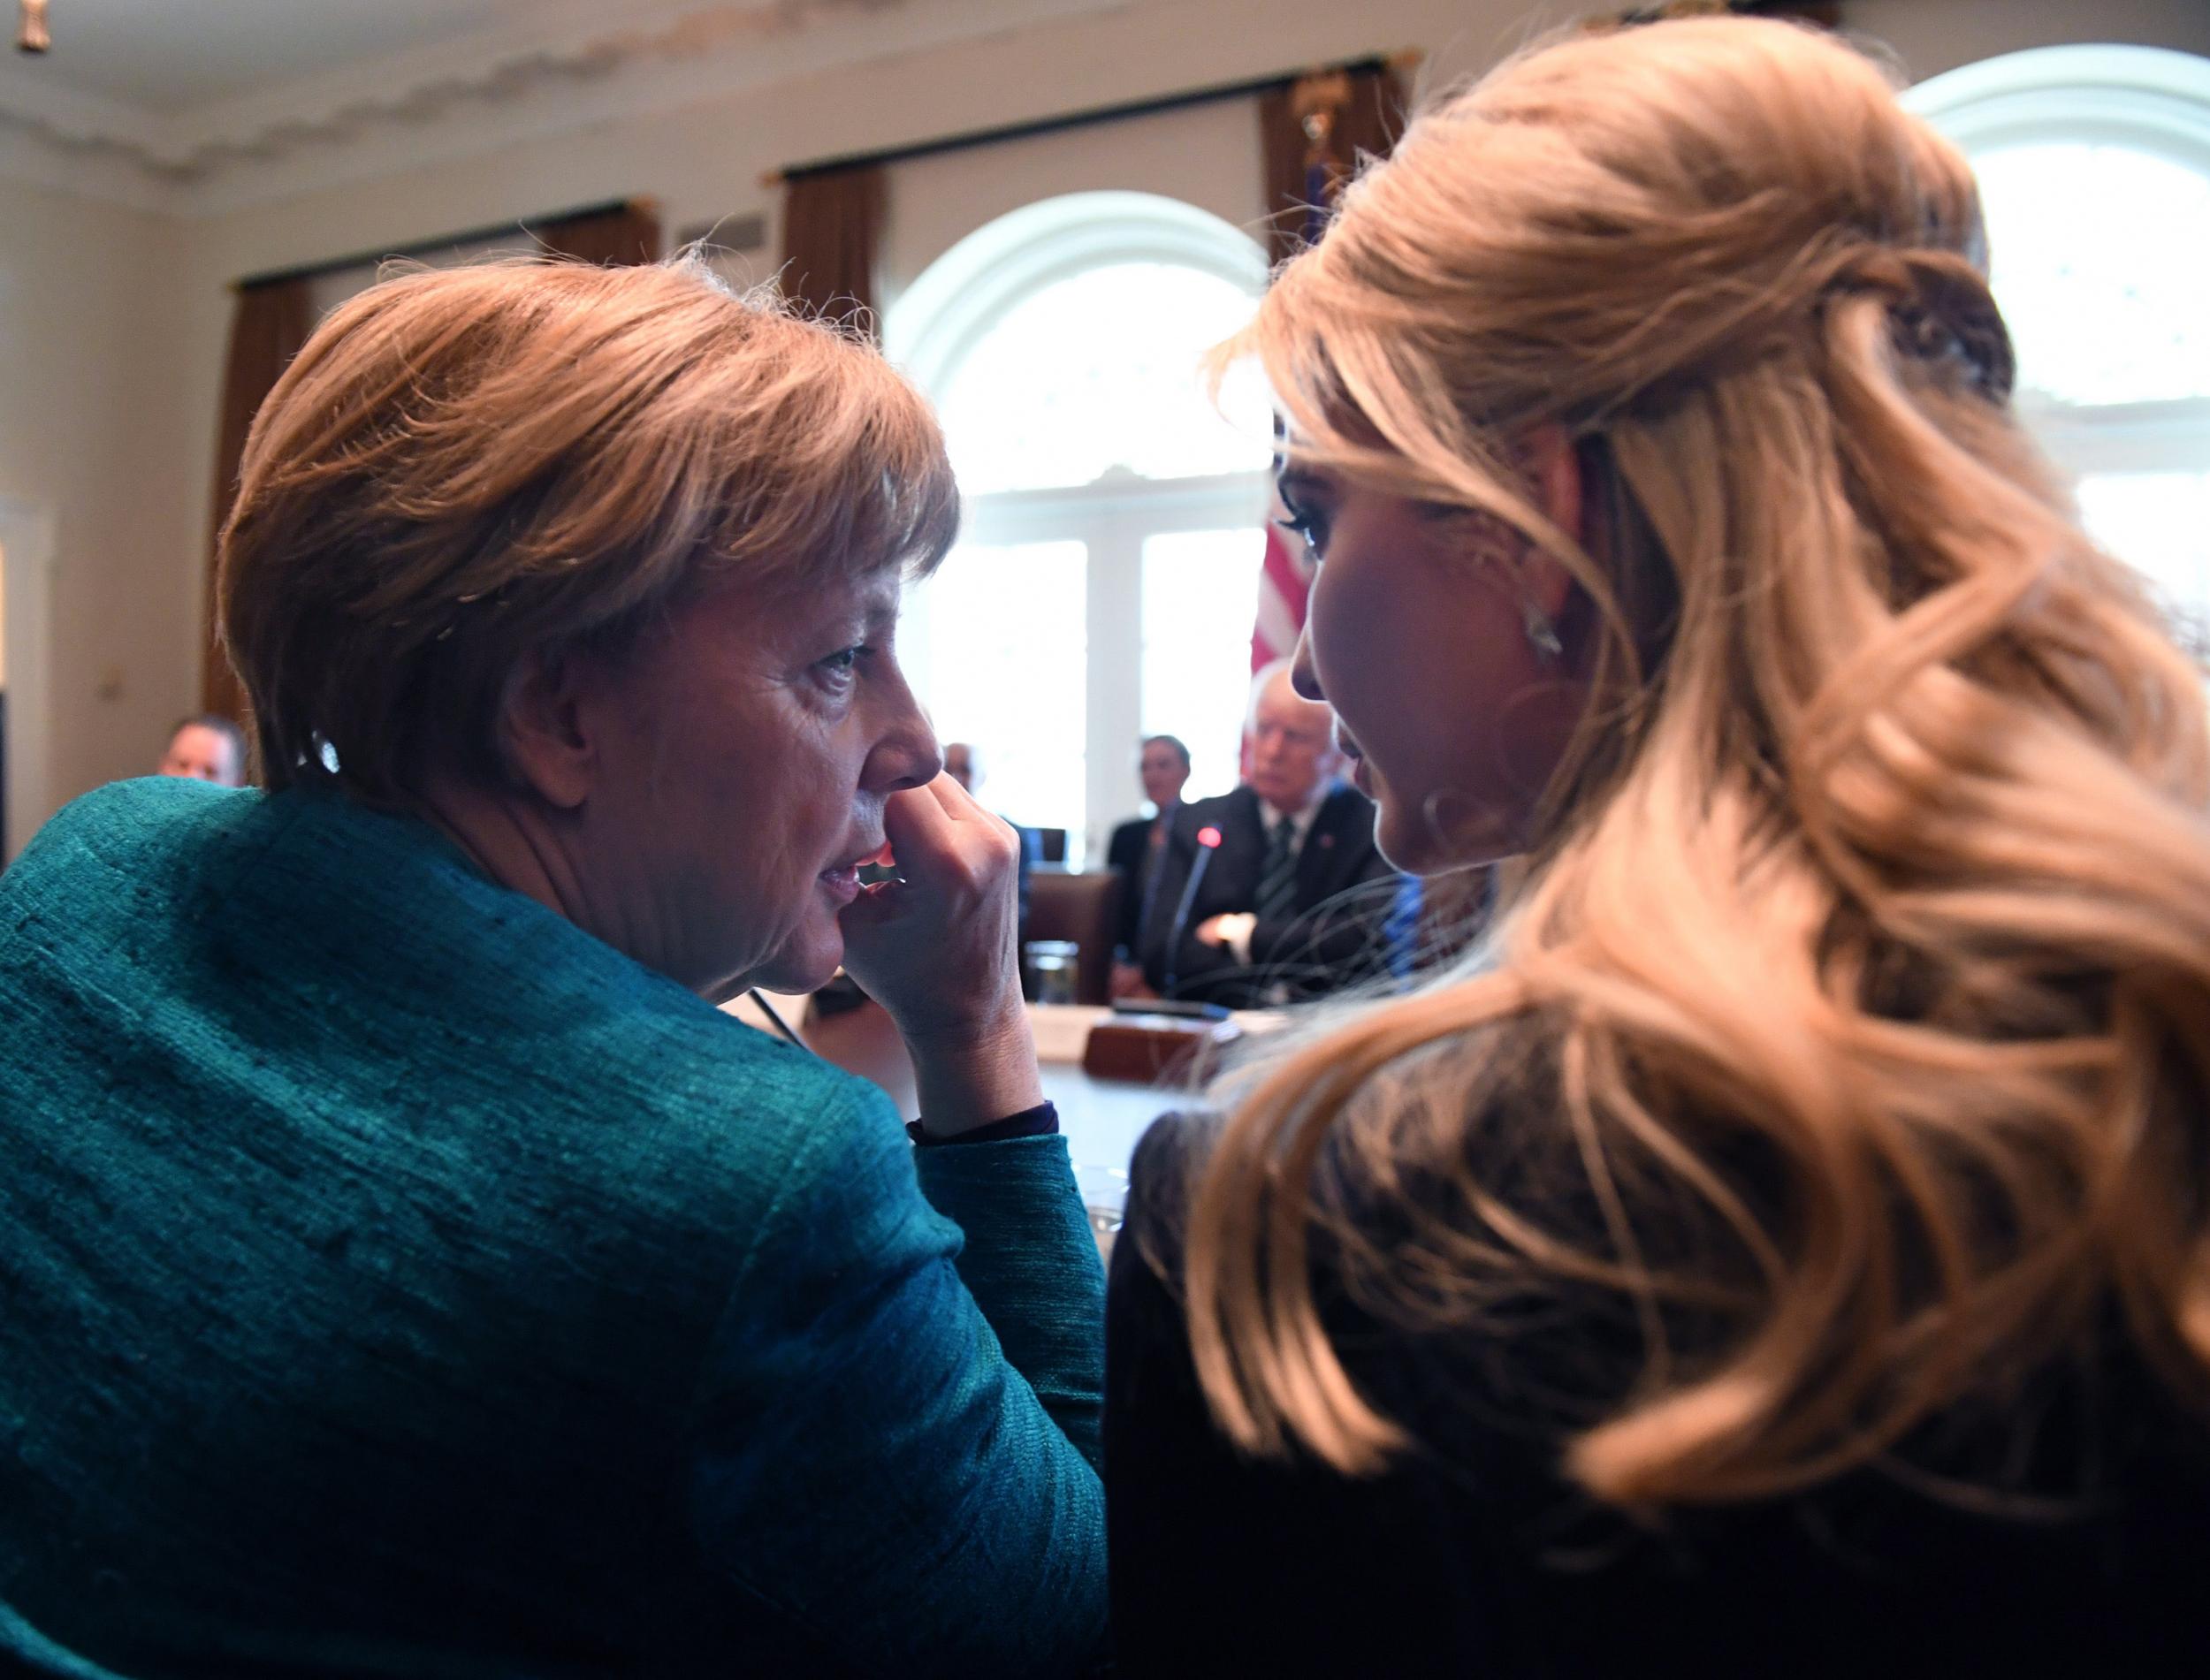 Ms Trump spent time with Ms Merkel when she visited the White House